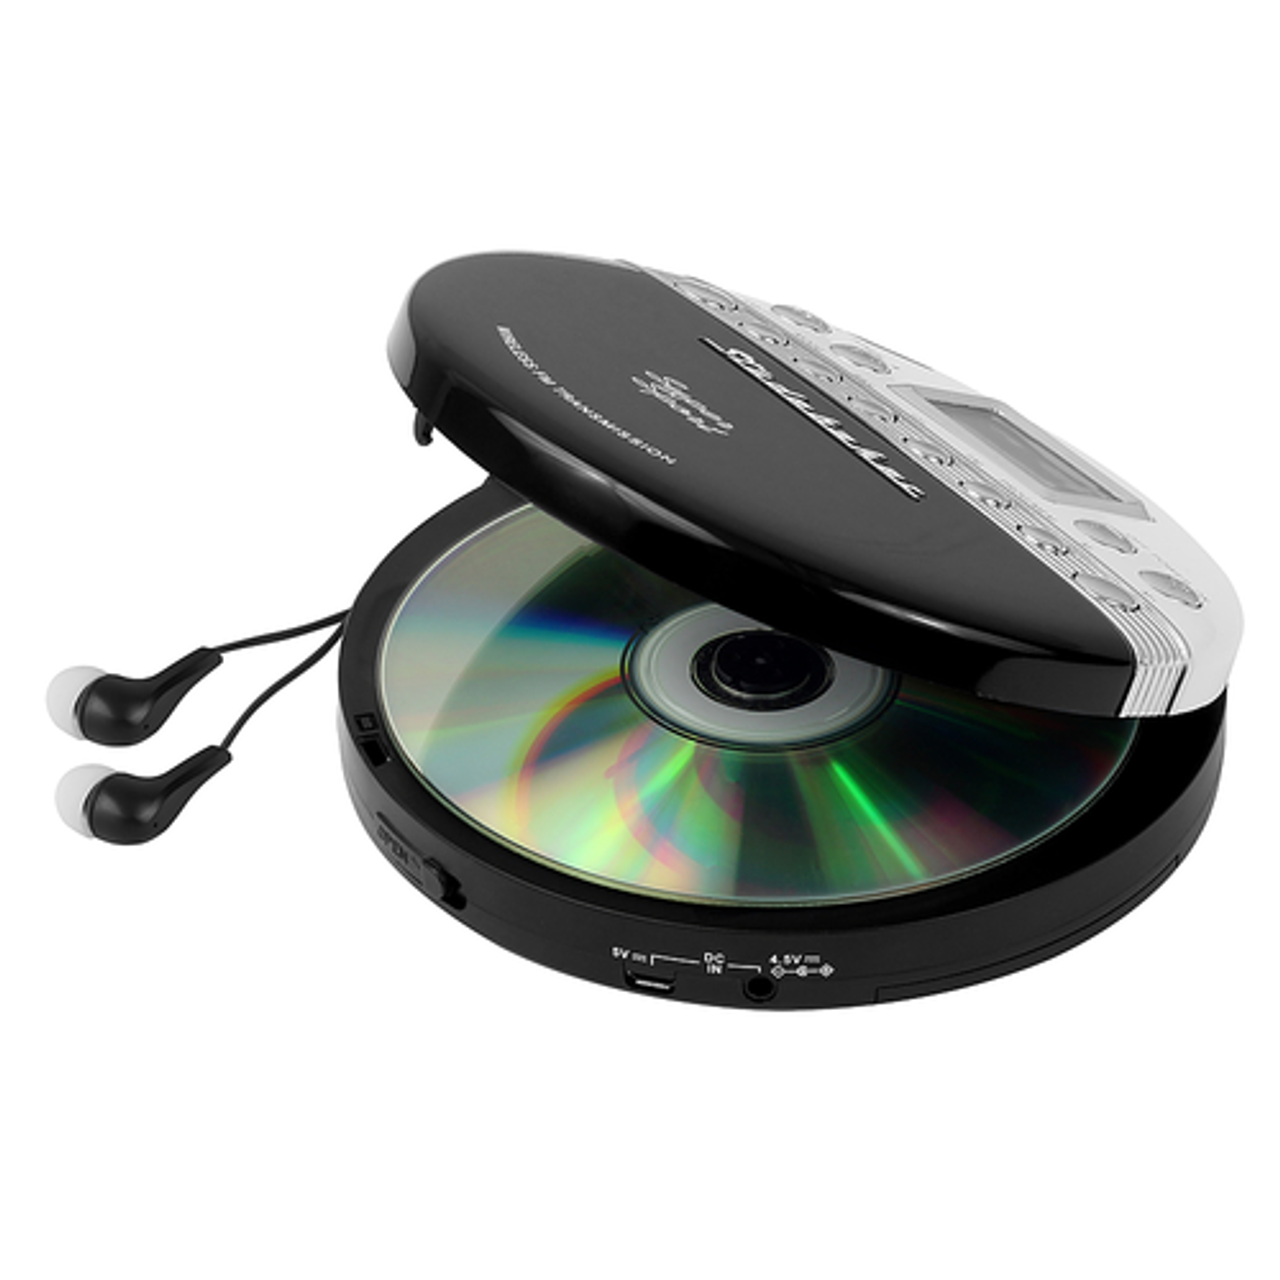 Studebaker - Joggable Personal CD Player with Wireless FM Transmission and FM PLL Radio - Black/White